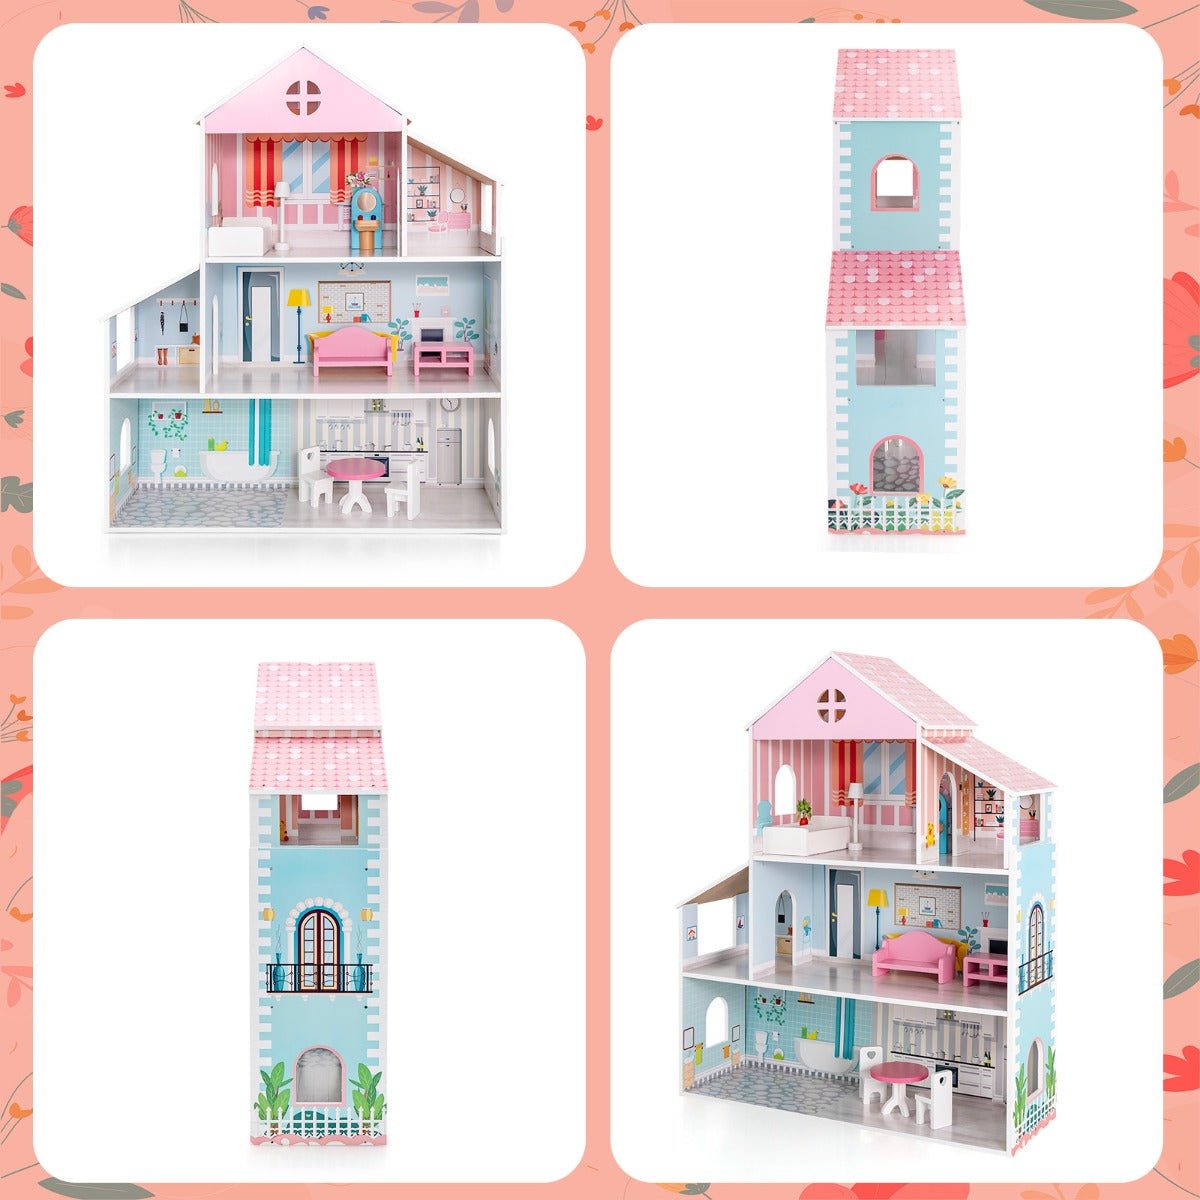 Wooden Doll House with Furniture: Building Stories and Memories